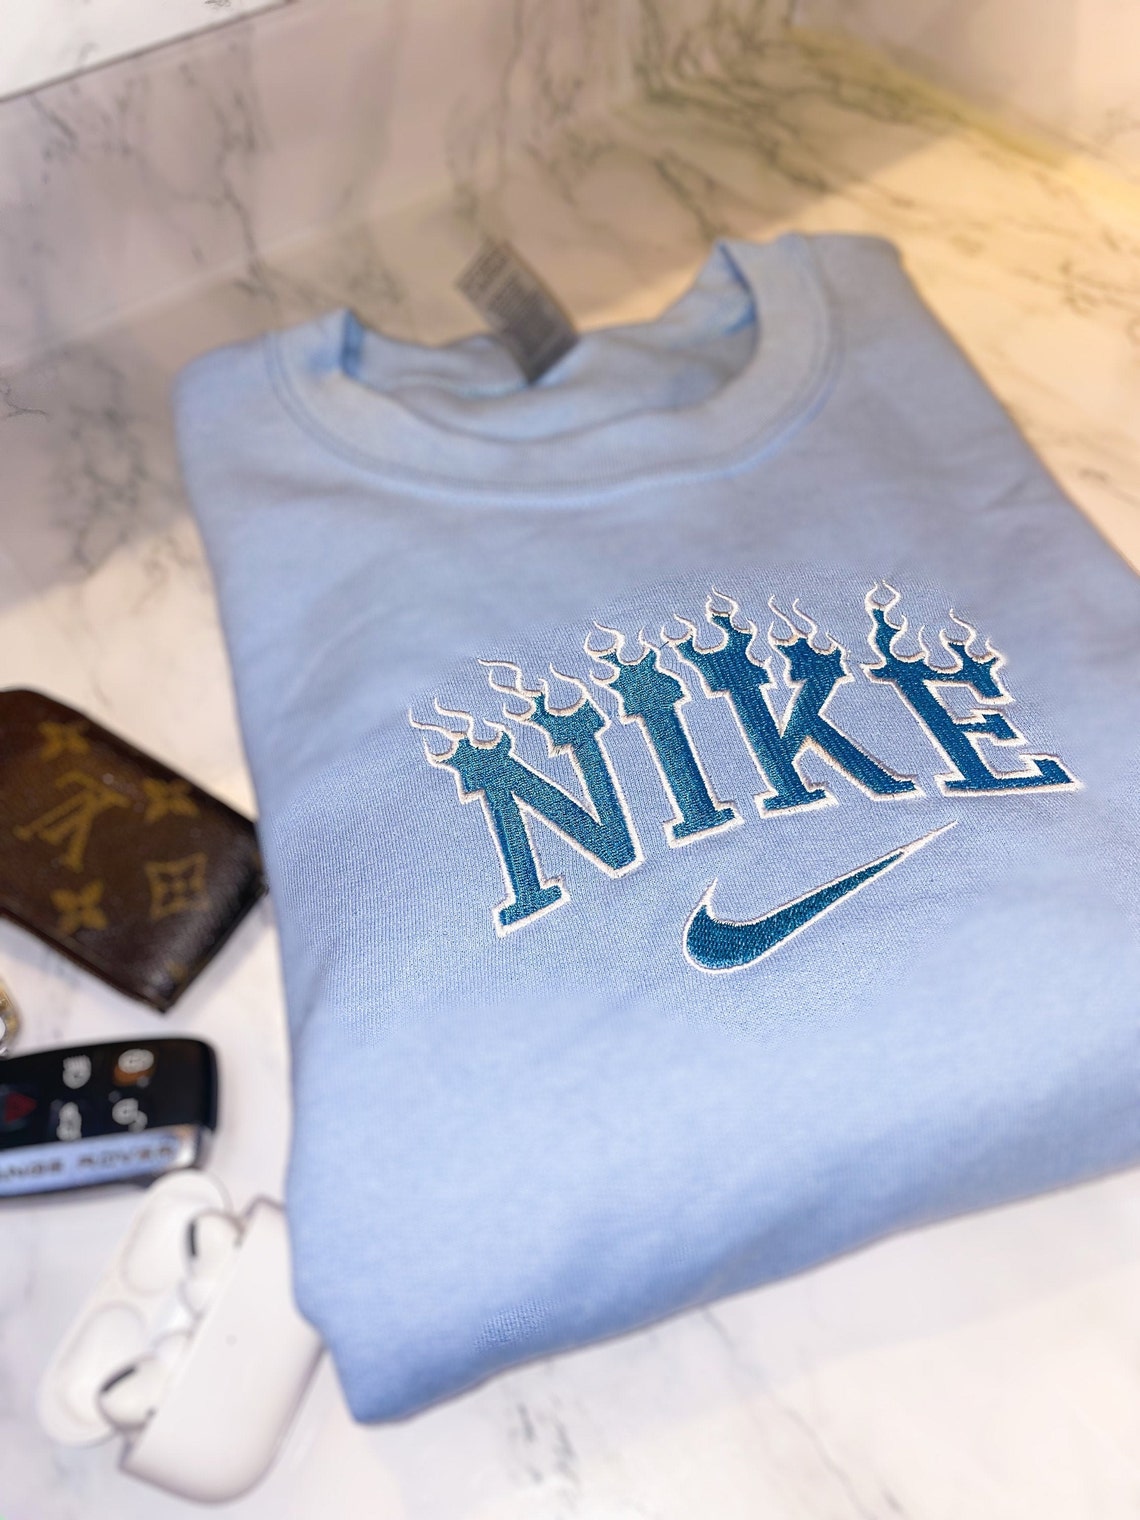 NIKE FLAME EMBROIDERY customizable | Etsy